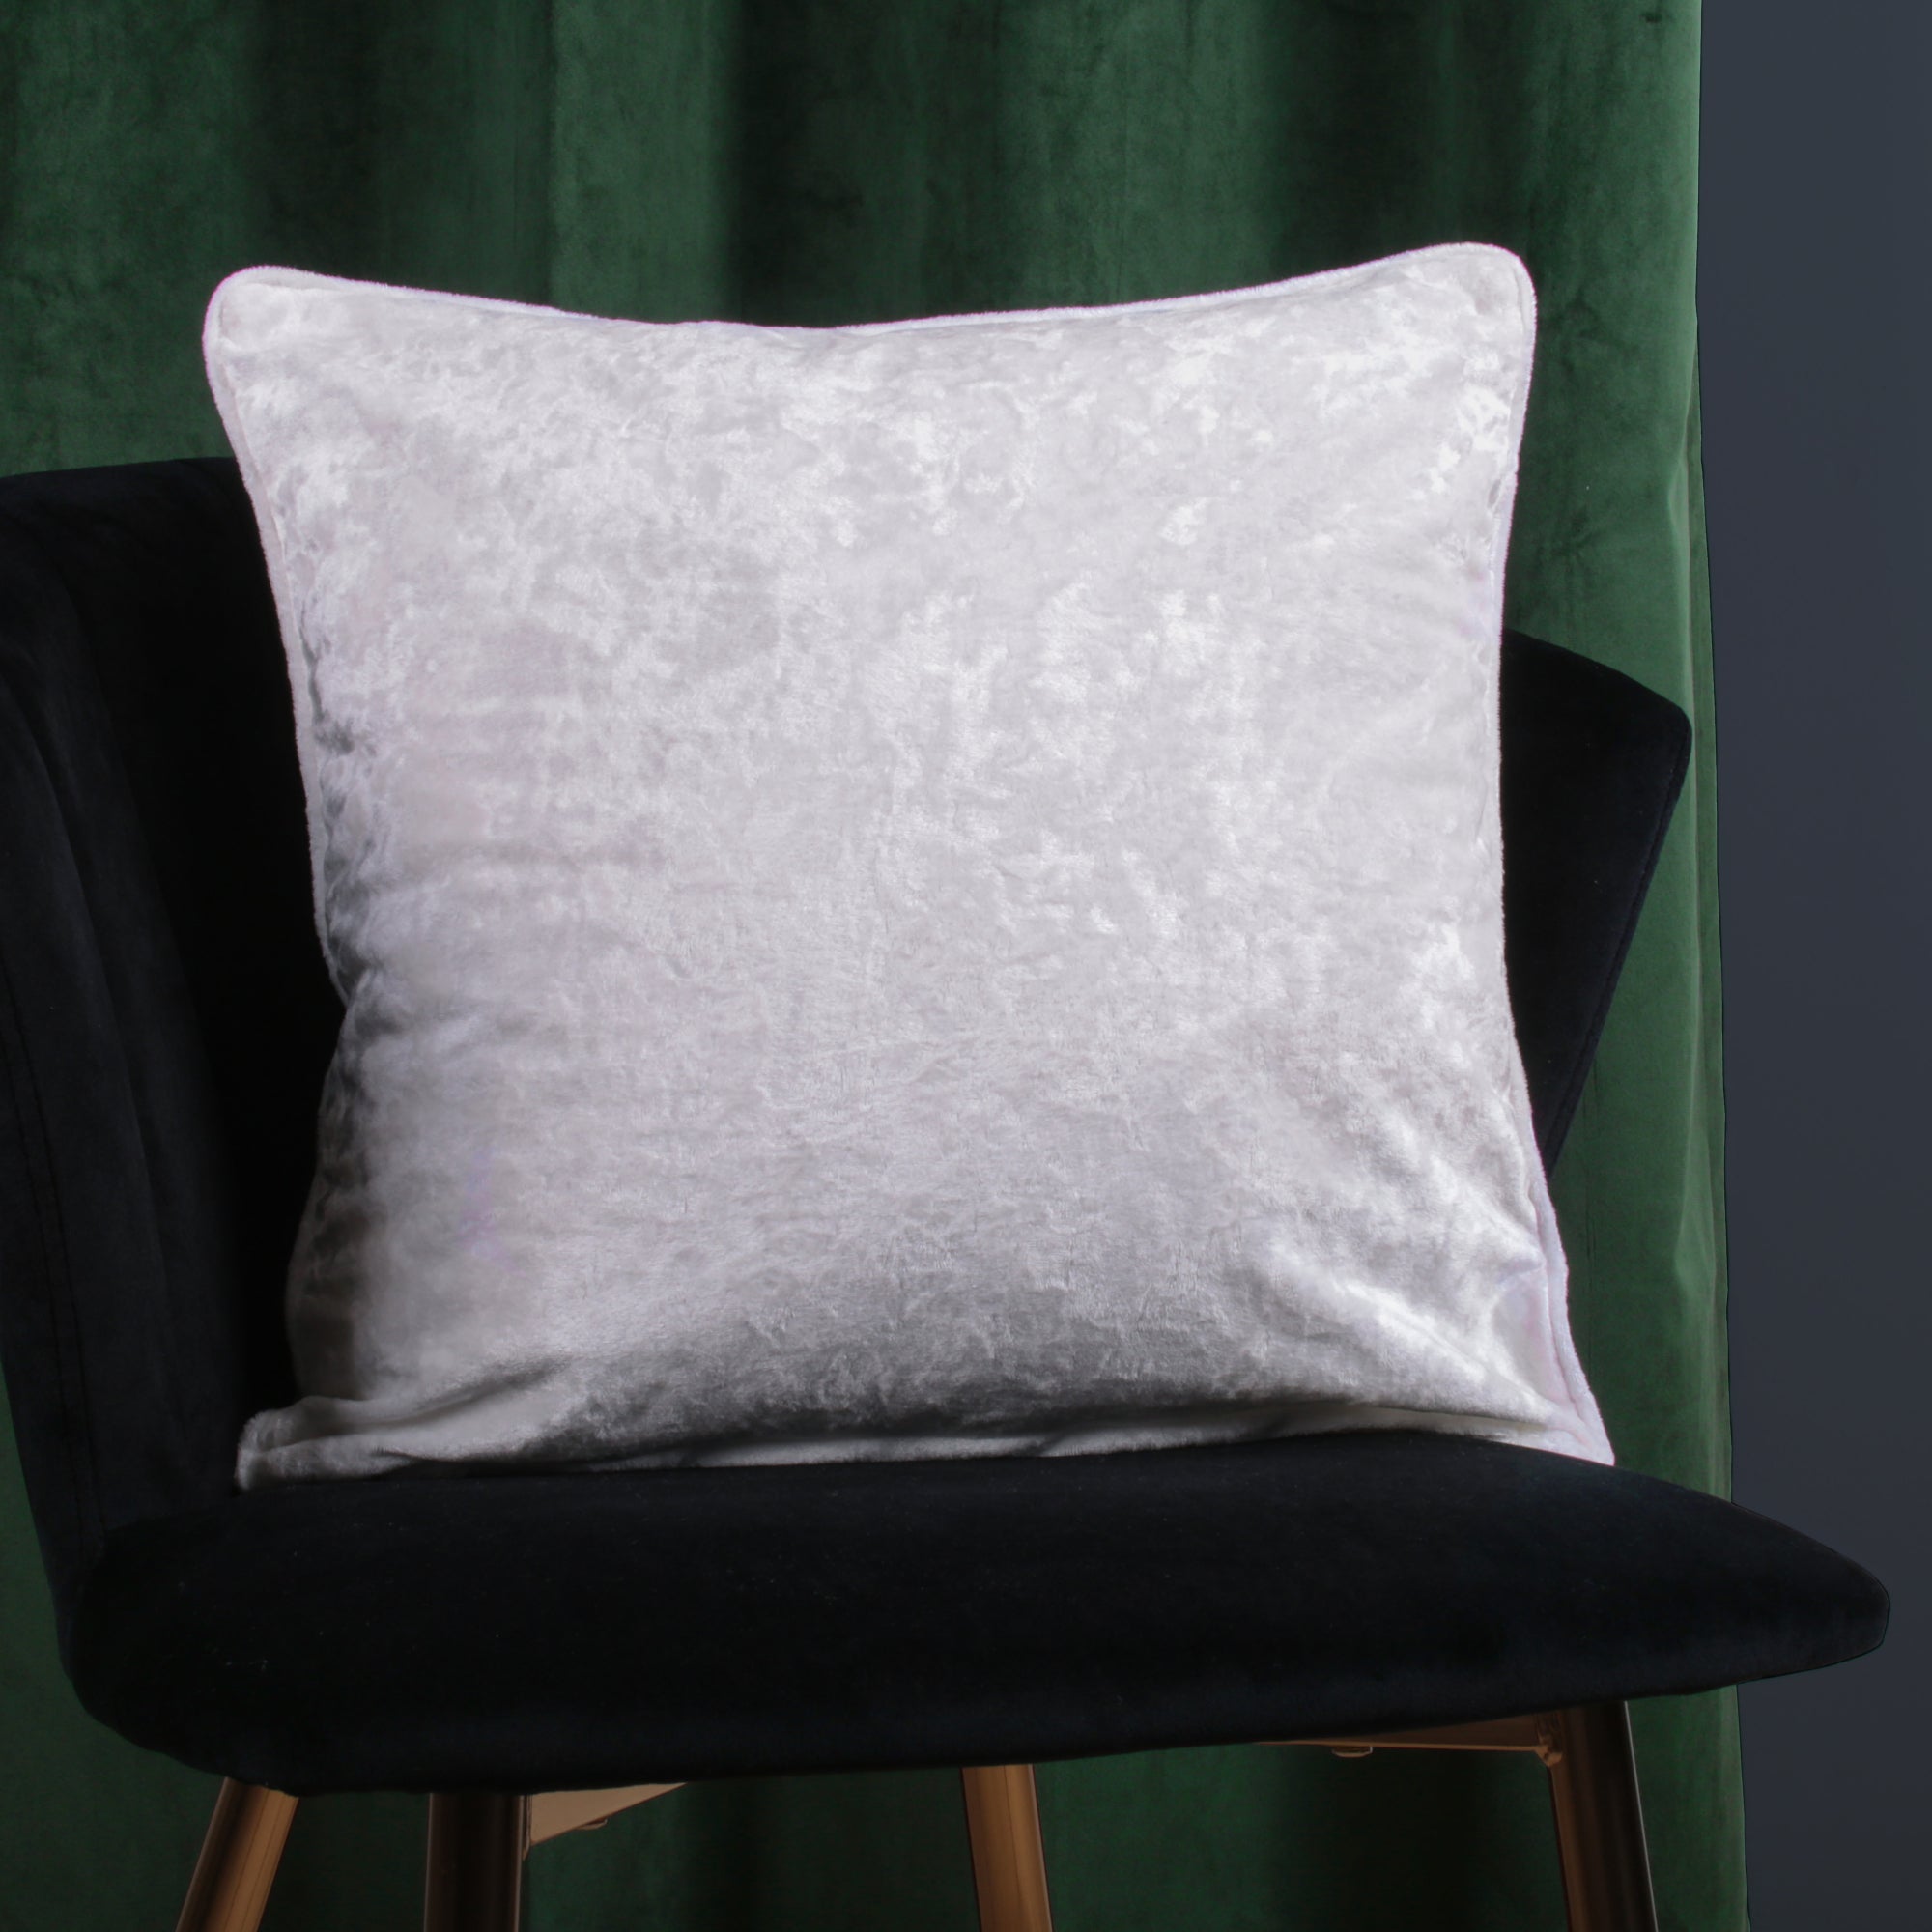 Filled Cushion Crushed Velvet by Soiree in White